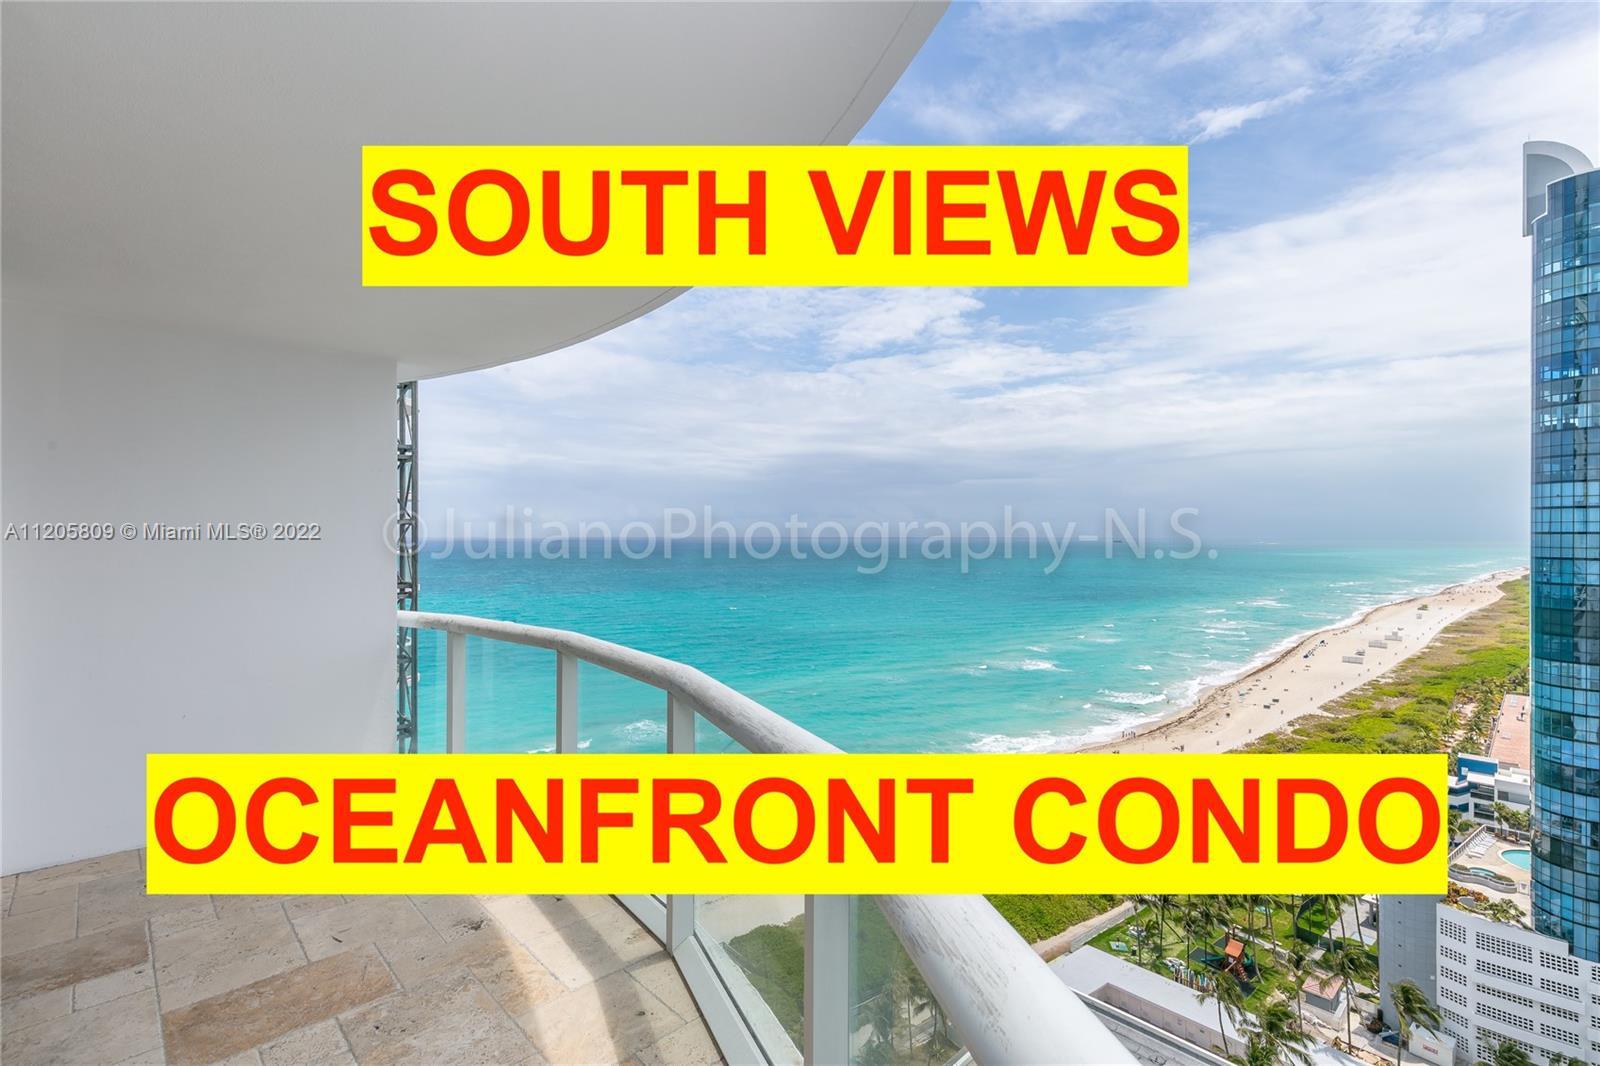 Oceanfront condo located in one of the tallest condominiums on Miami Beach! Enjoy stunning south vie